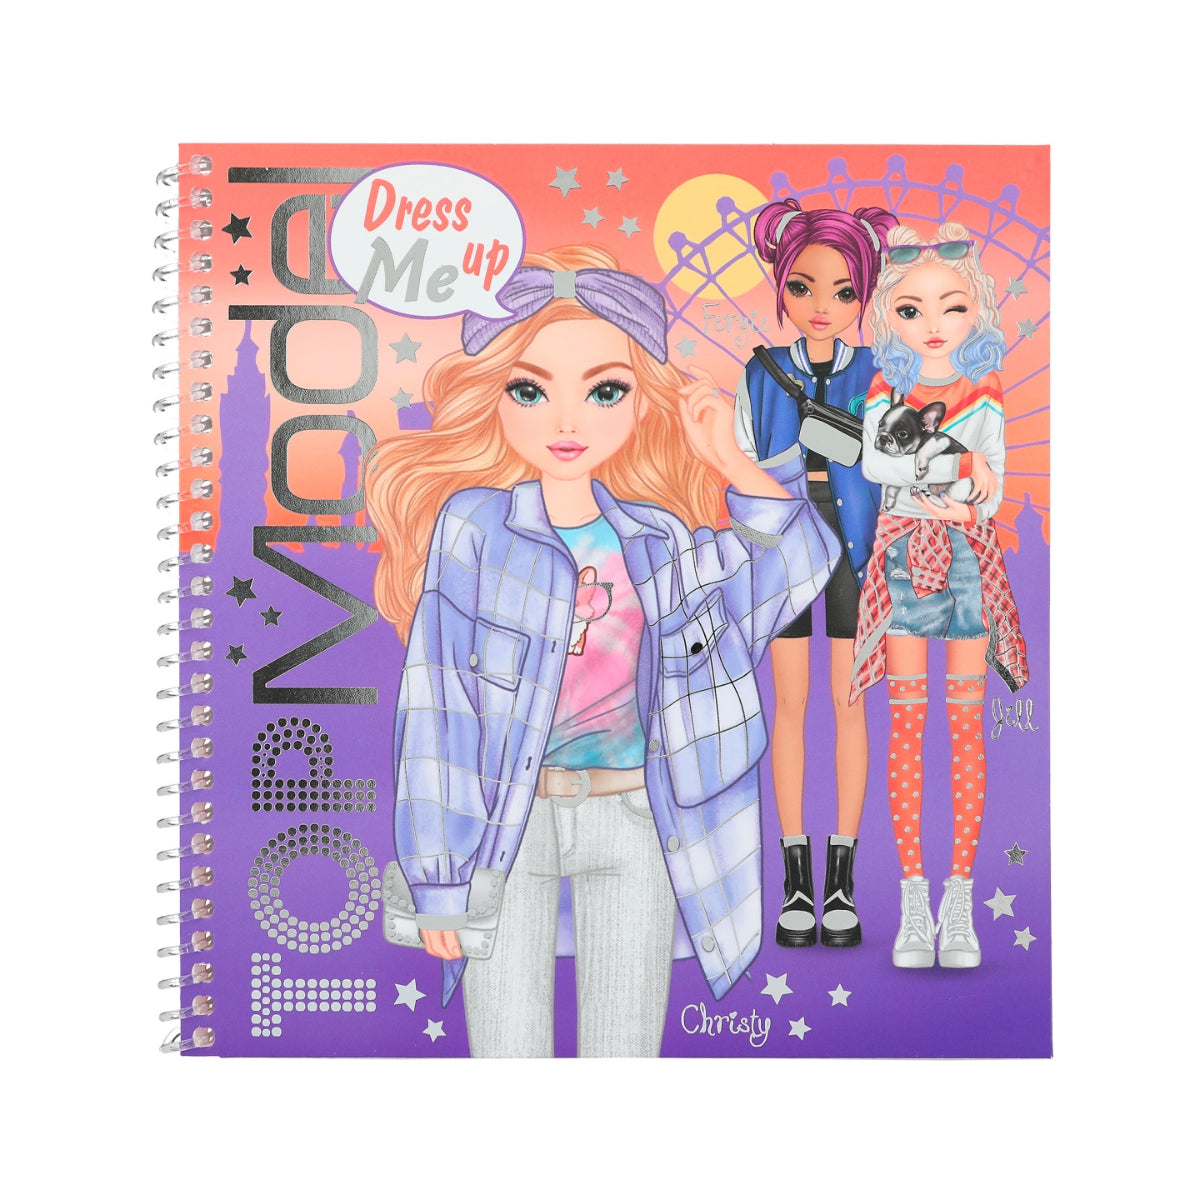 Free delivery and returns on eligible orders. Buy Top Model Dress Me Up  Sticker Book at  UK.